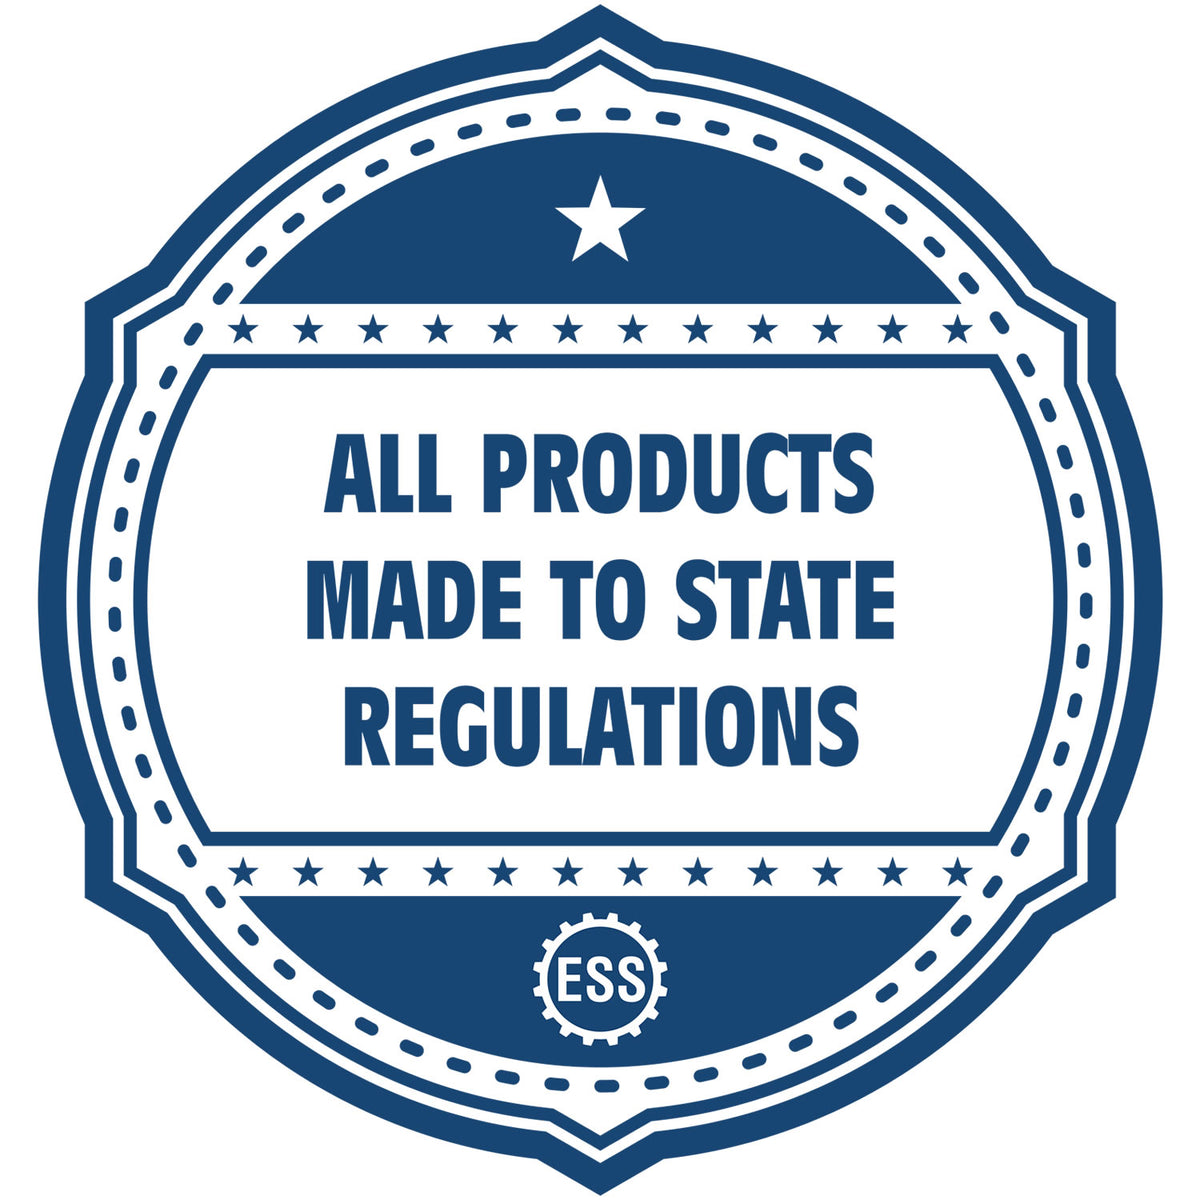 An icon or badge element for the Digital Minnesota Landscape Architect Stamp showing that this product is made in compliance with state regulations.